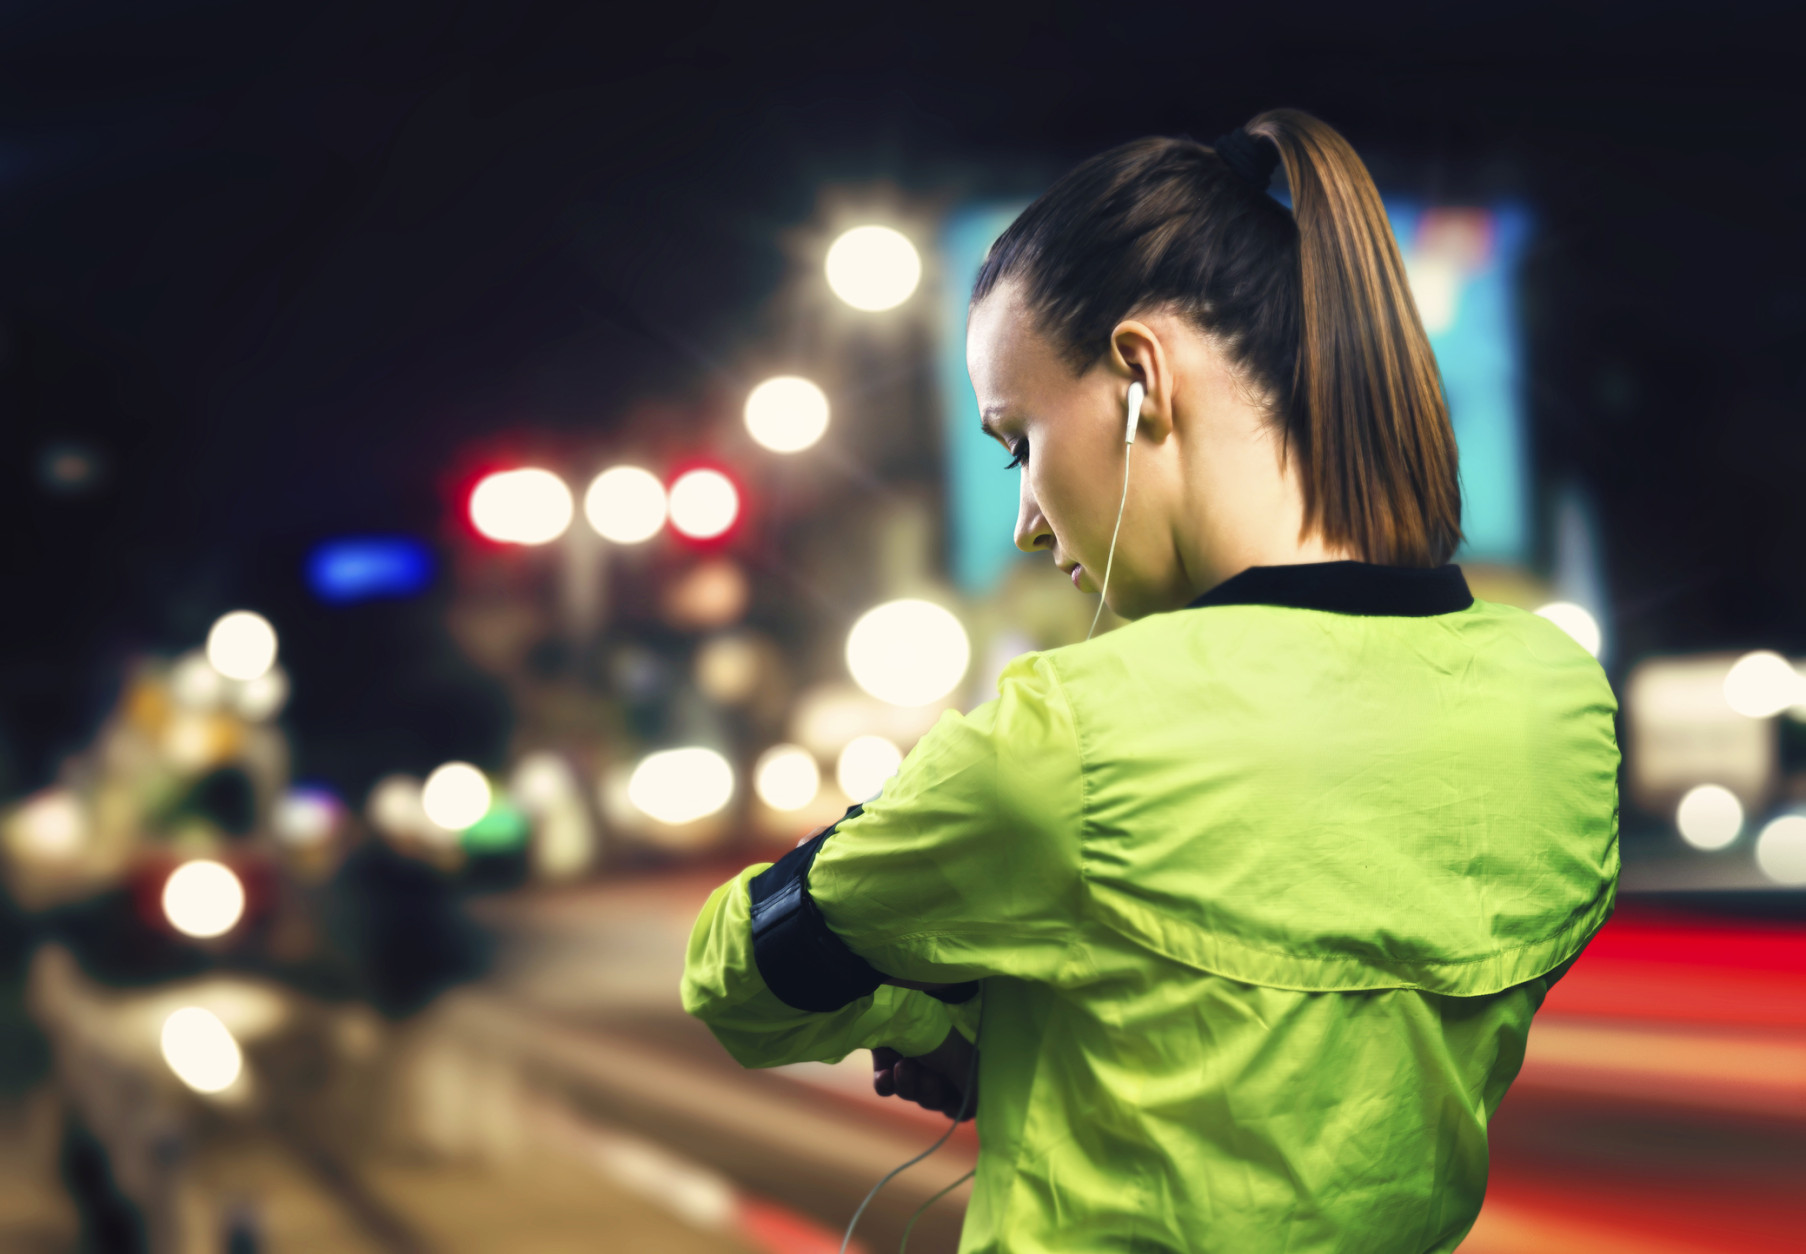 Young woman jogging at night in the city